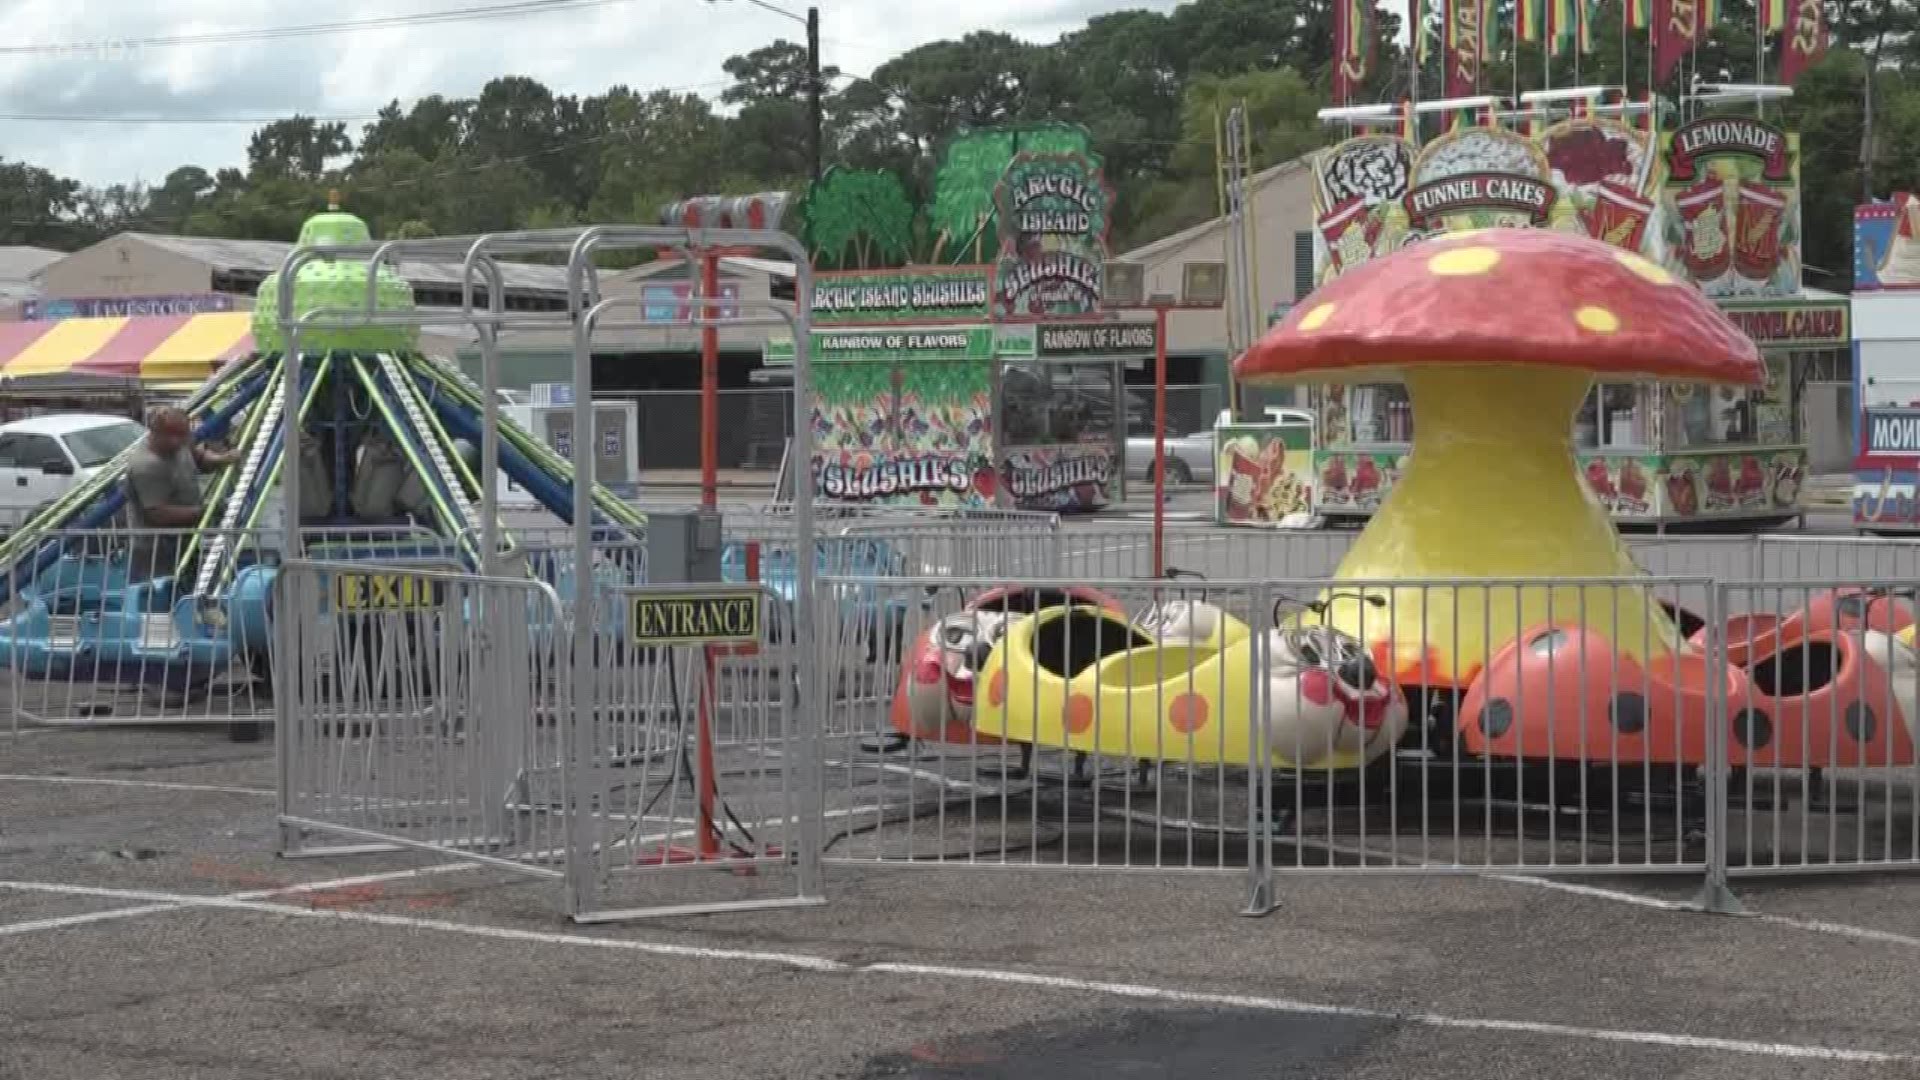 Rain or shine, the East Texas State Fair rarely shuts down. However, there are plans in place if severe weather strikes.